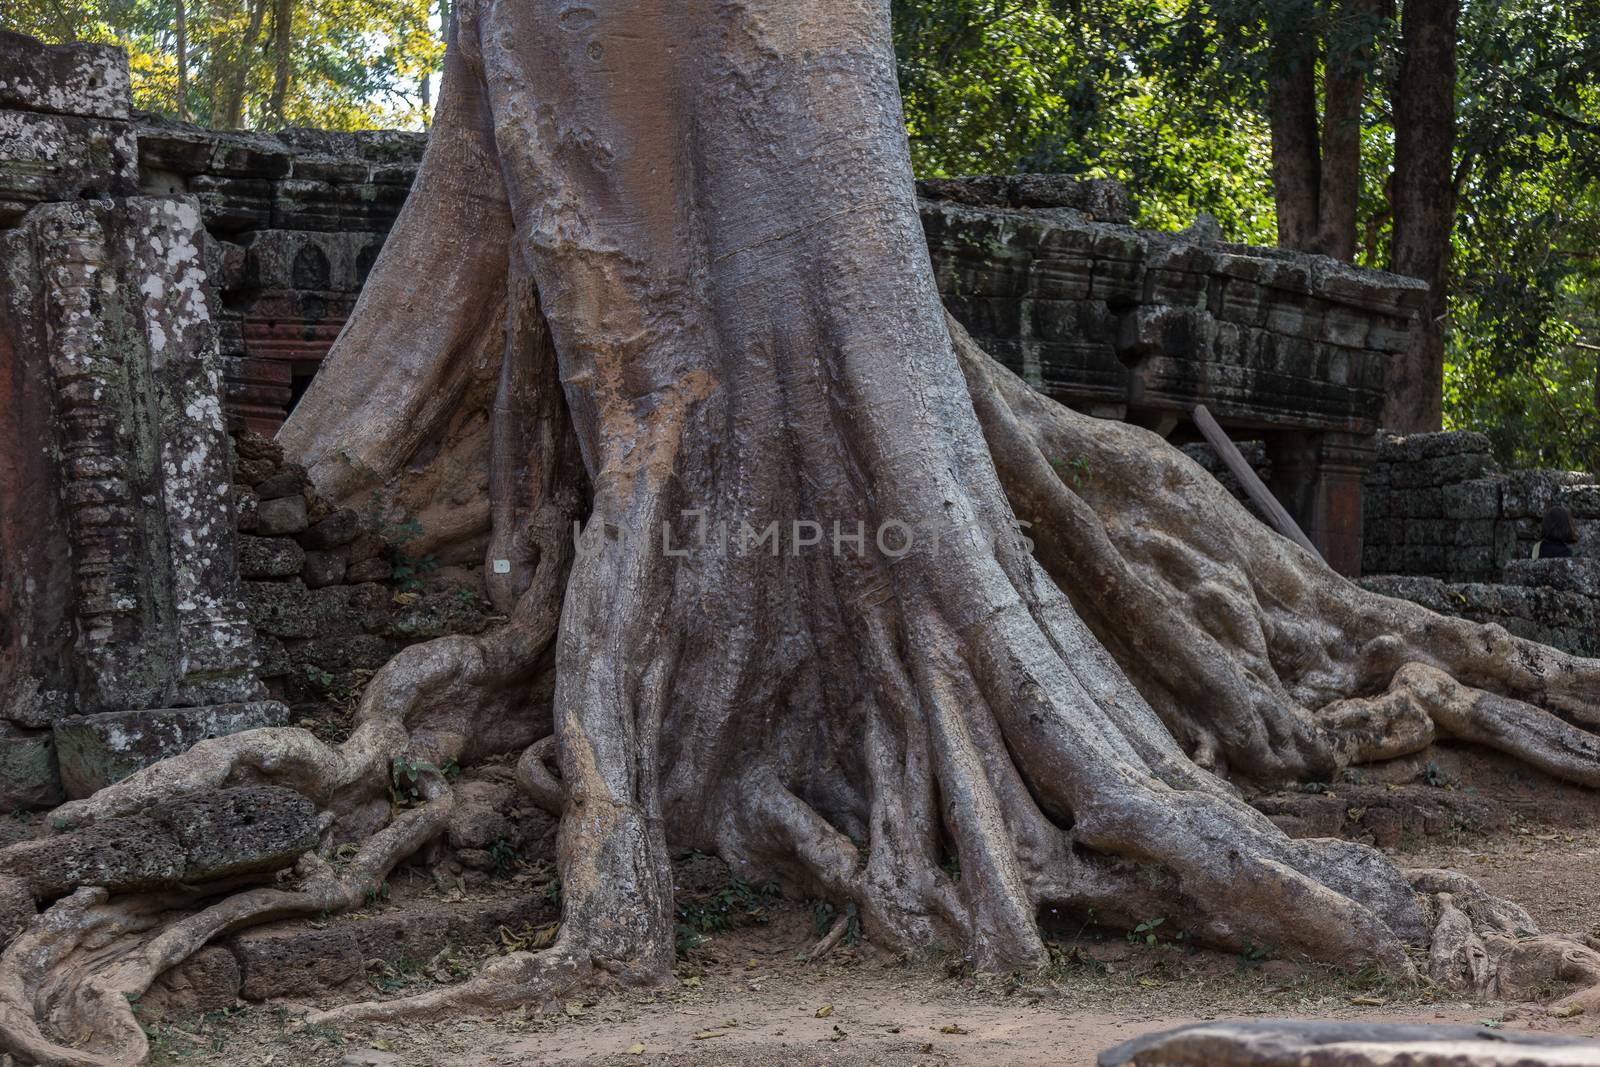 Ta Prohm, Angkor Wat, Cambodia, trees engulfing the temple structures with roots by kgboxford